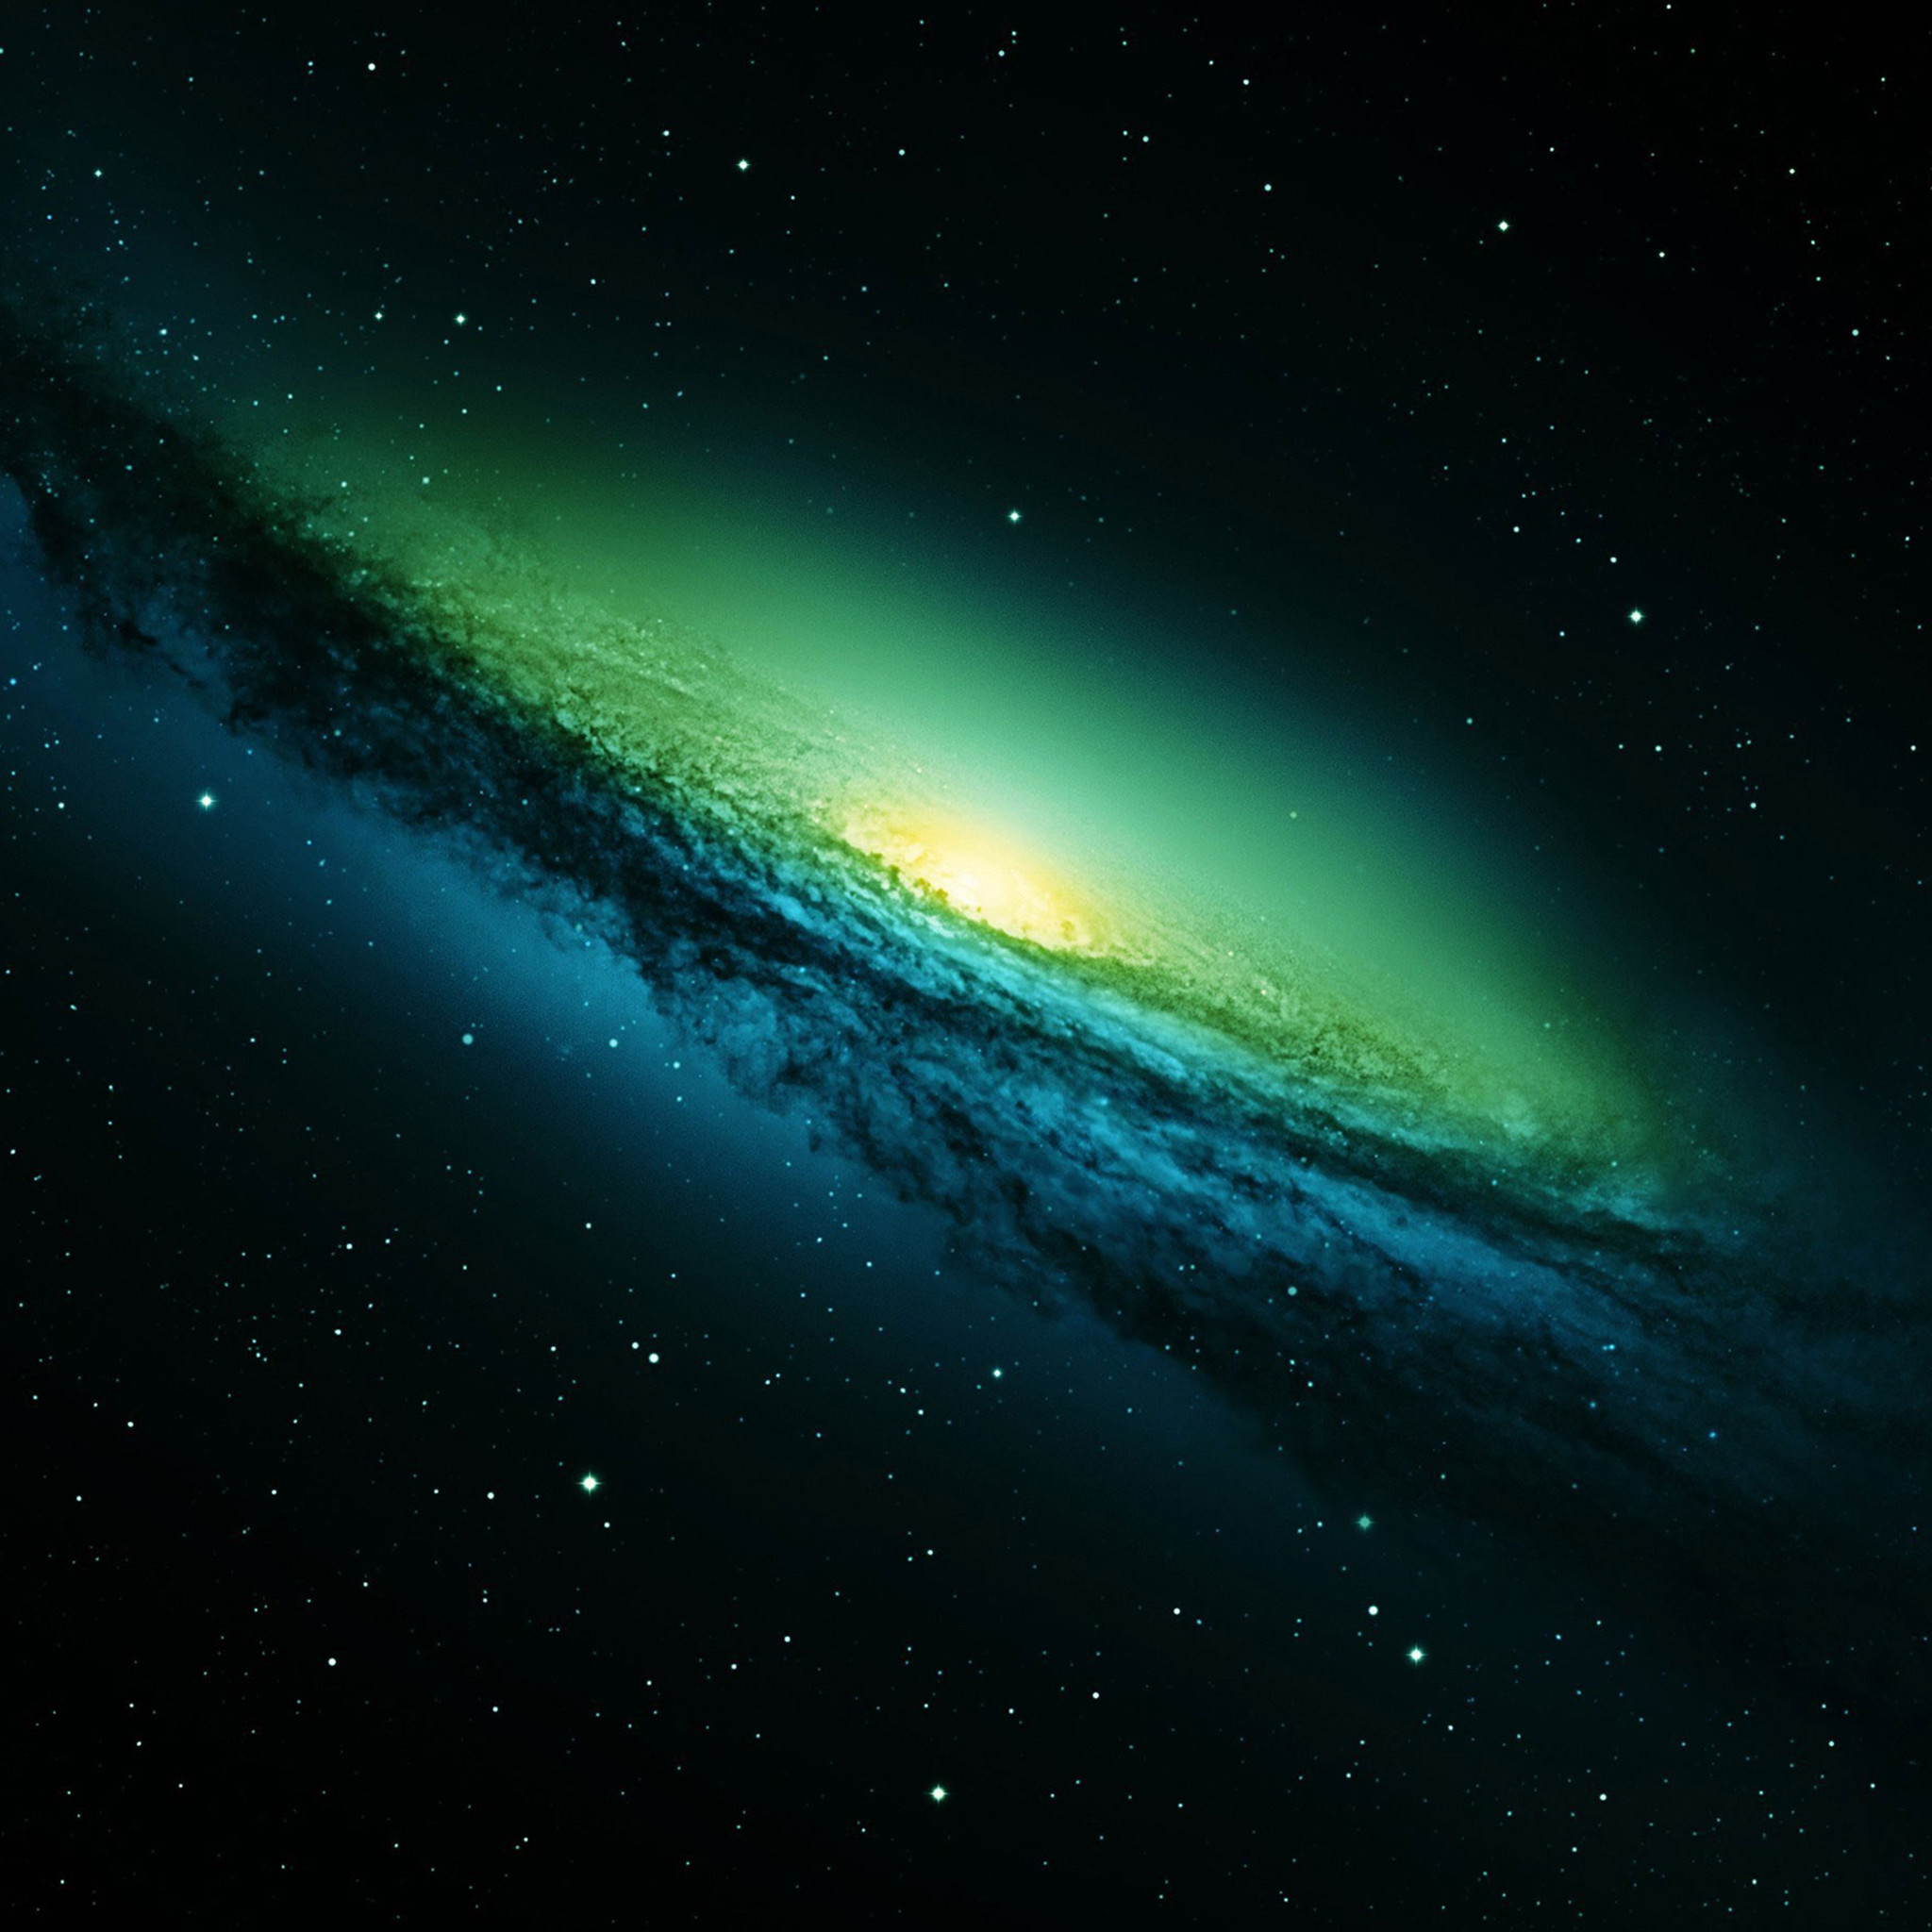 samsung galaxy grand prime plus wallpaper,sky,atmosphere,green,aurora,outer space